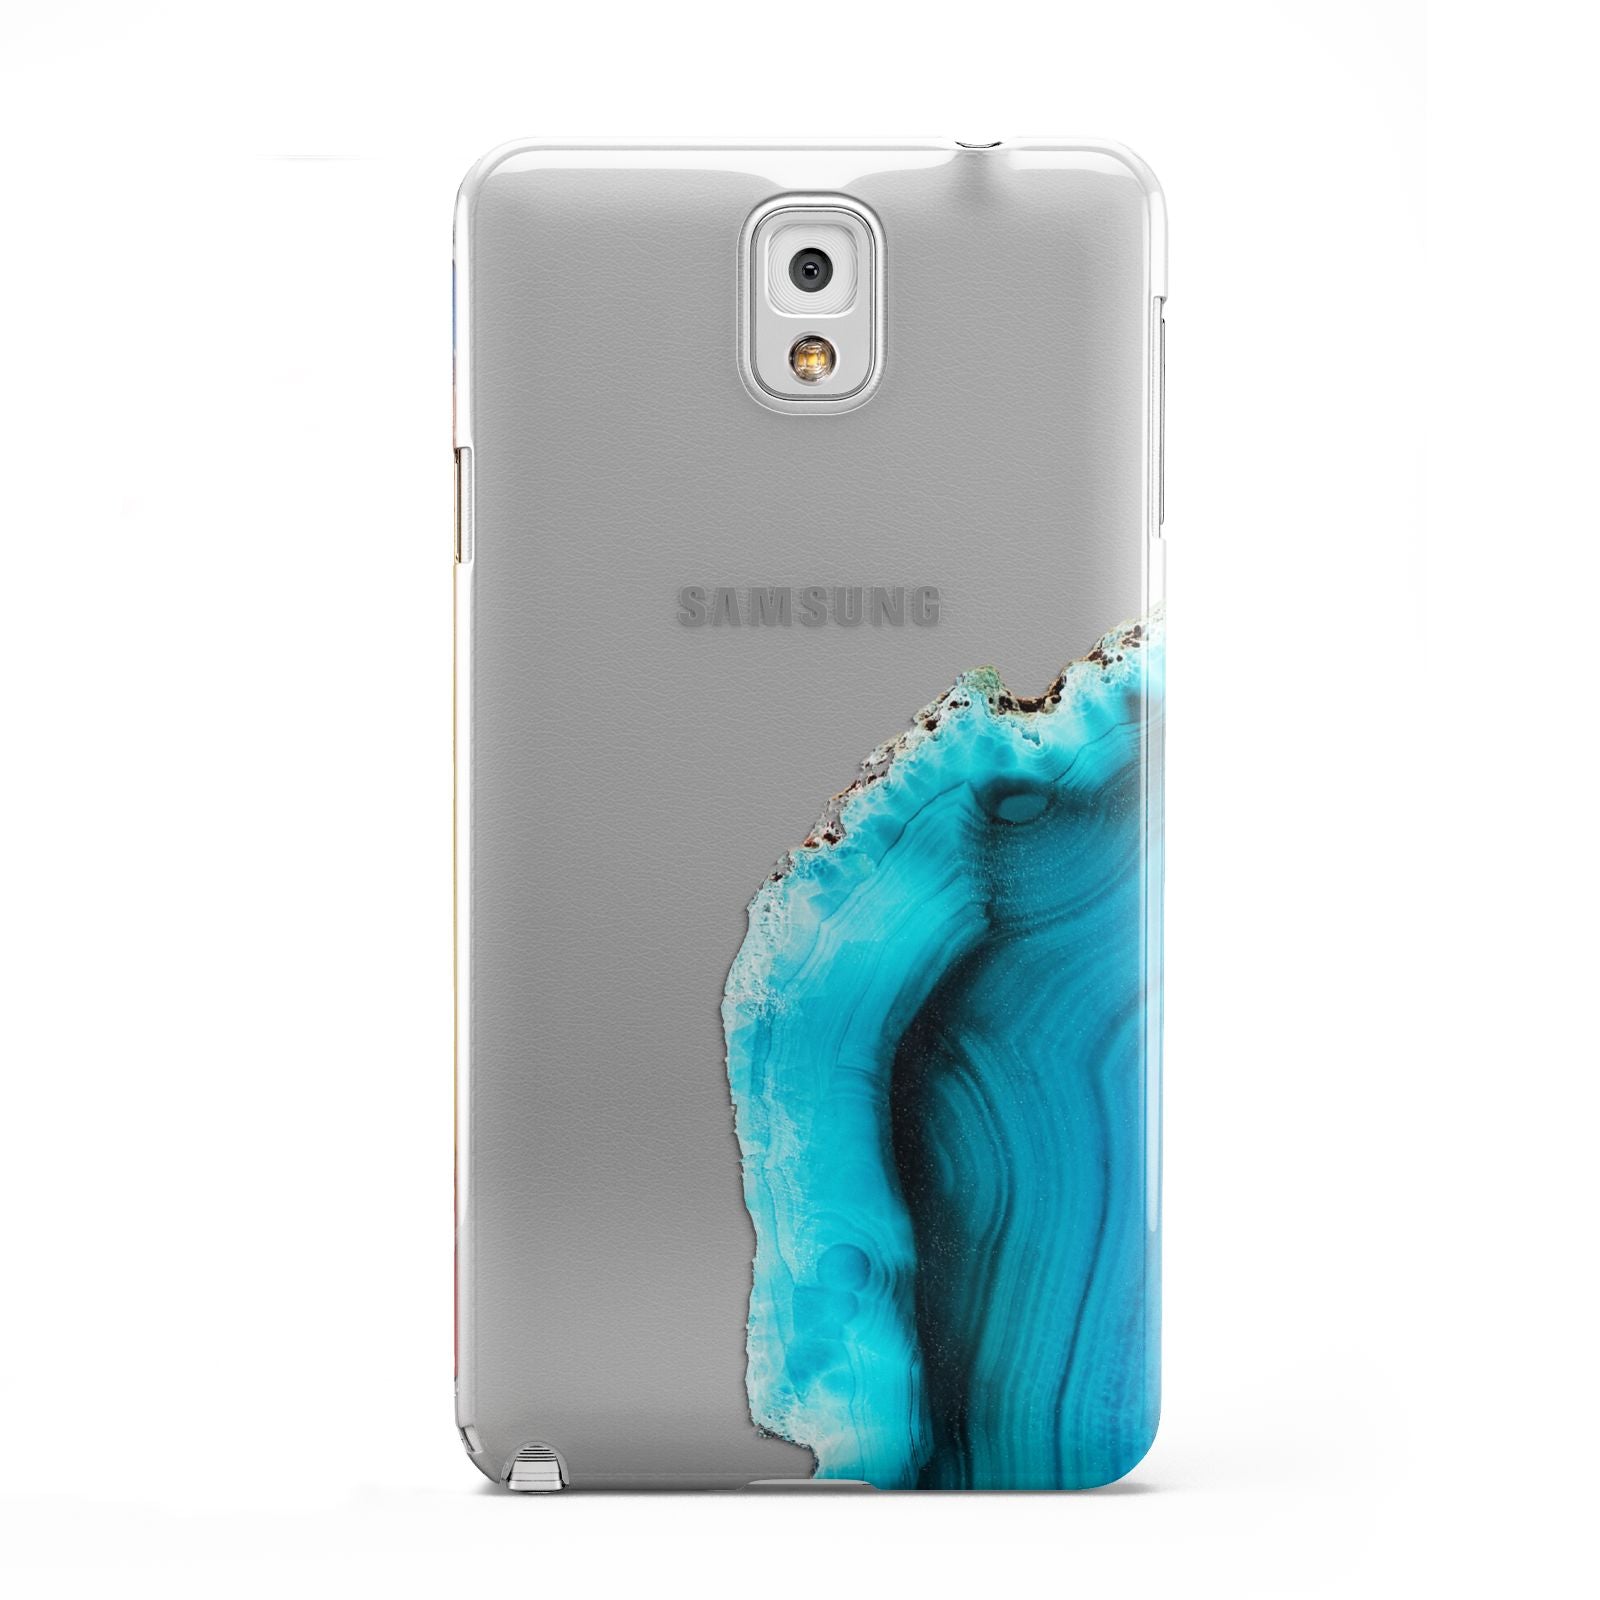 Agate Blue Turquoise Samsung Galaxy Note 3 Case